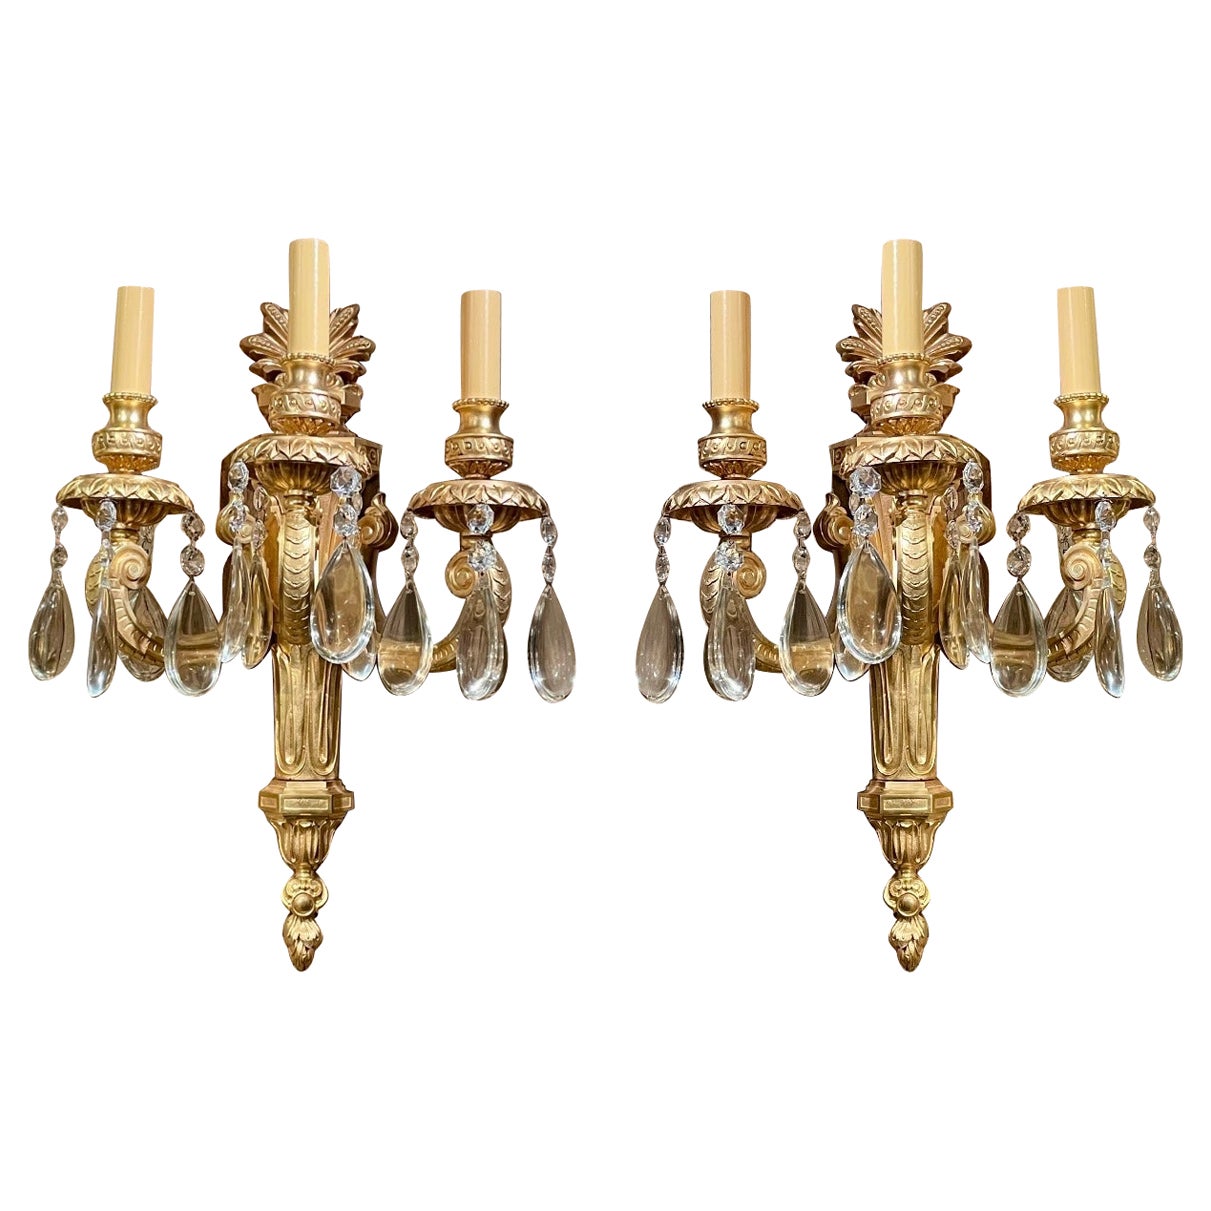 Pair of Antique French Regency Ormolu Chateau Lights / Sconces, Circa 1840-1850.